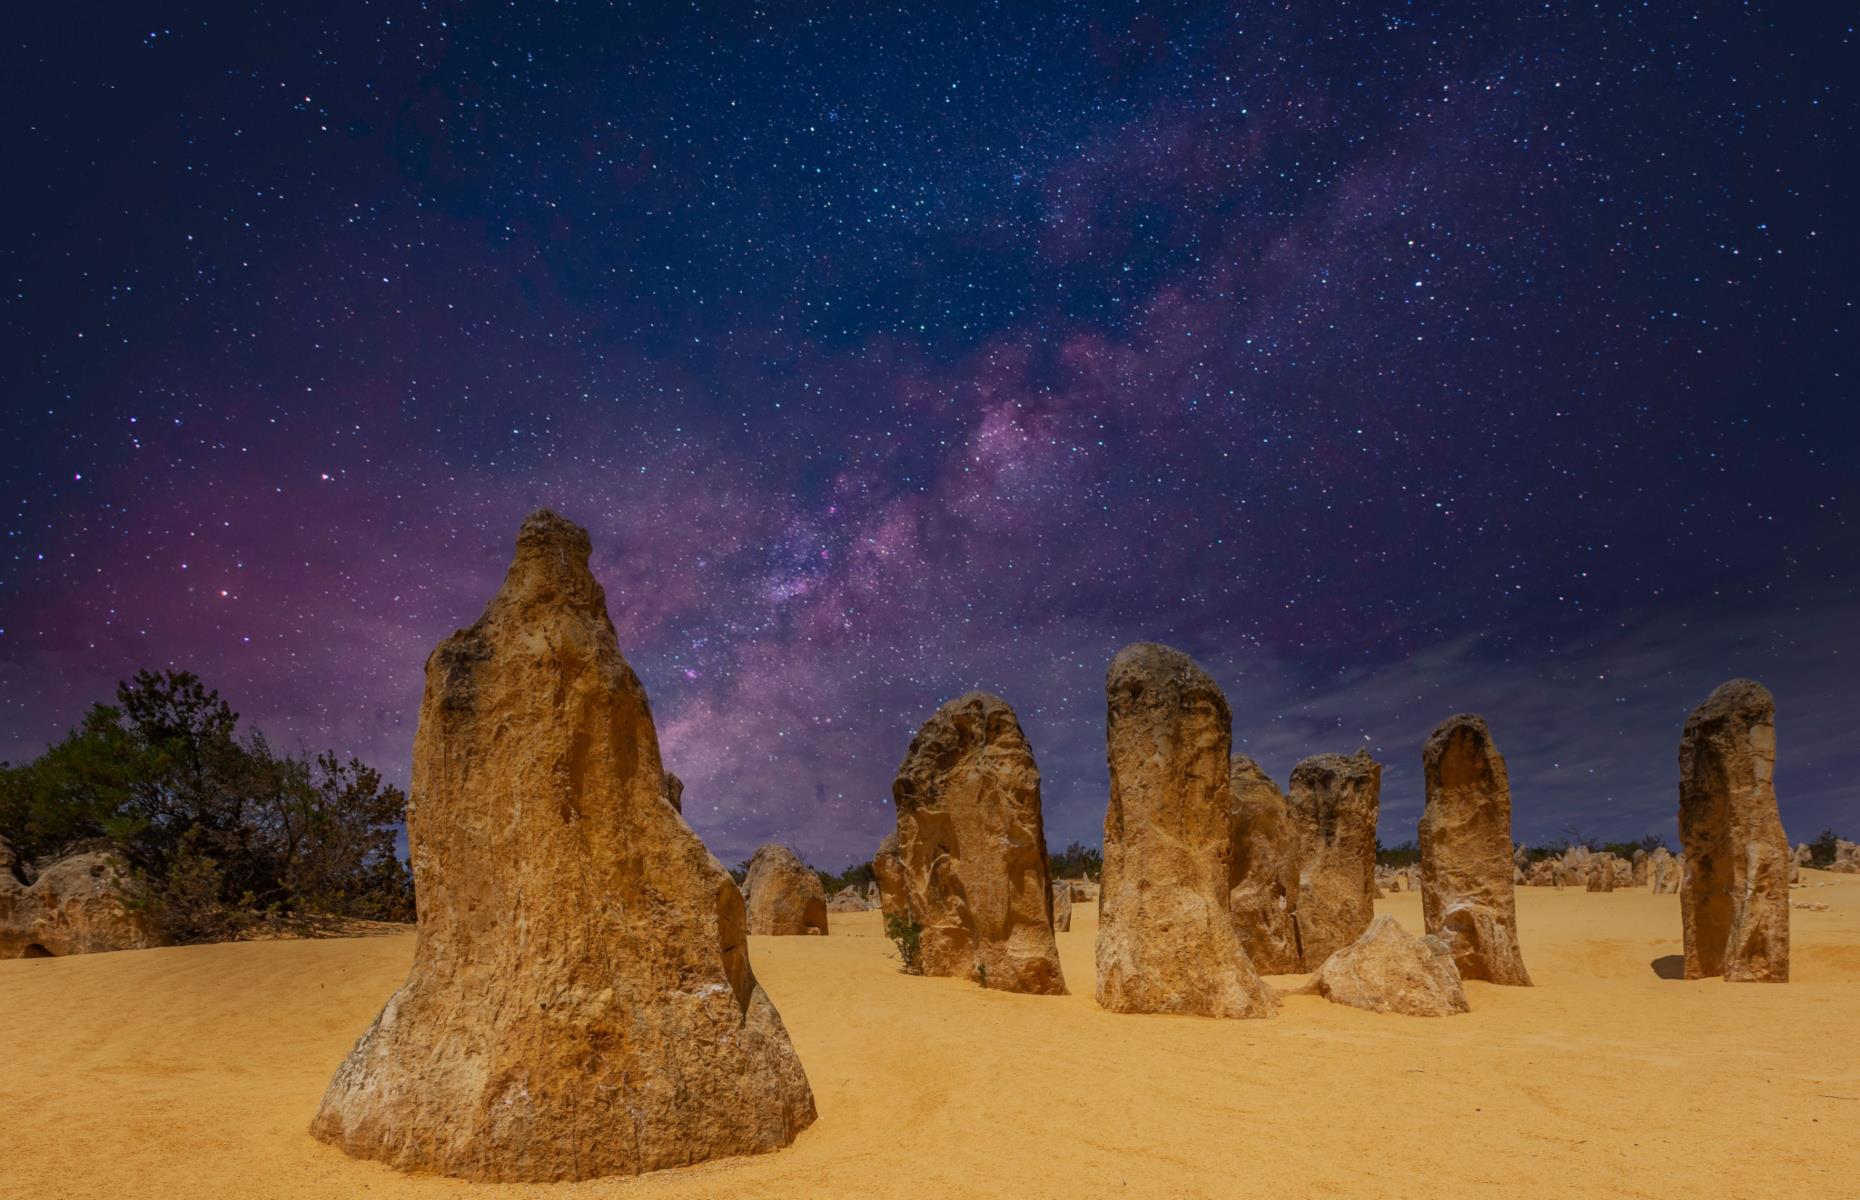 <p>Western Australia is home to some pretty wild looking topography and the Pinnacles Desert of <a href="https://parks.dpaw.wa.gov.au/park/nambung">Nambung National Park</a> are a prime example. The desert’s “pinnacle” formations are limestone spires that stick straight out of the ground and there are thousands of them to behold. With a lake filled with equally strange formations built by micro-organisms, as well as coastal dunes, flowering plants and gorgeous beaches, this park is truly one of a kind.</p>